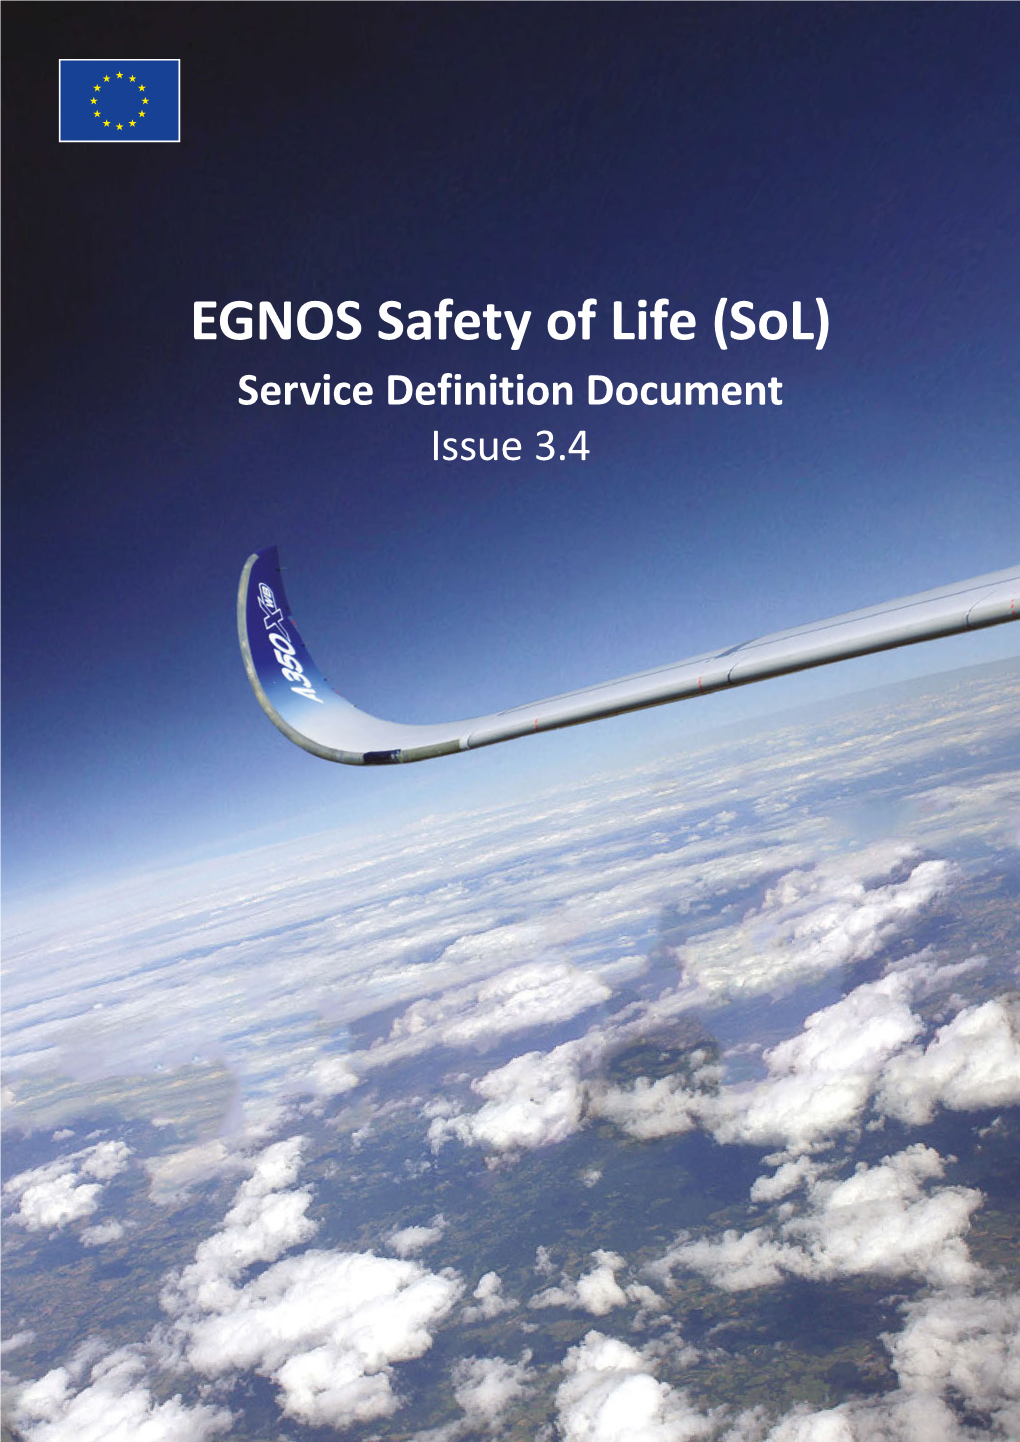 Sol Service Definition Document (Fur- As the Use of EGNOS at Non-ATS Environments, Local Ther “EGNOS Sol SDD”)